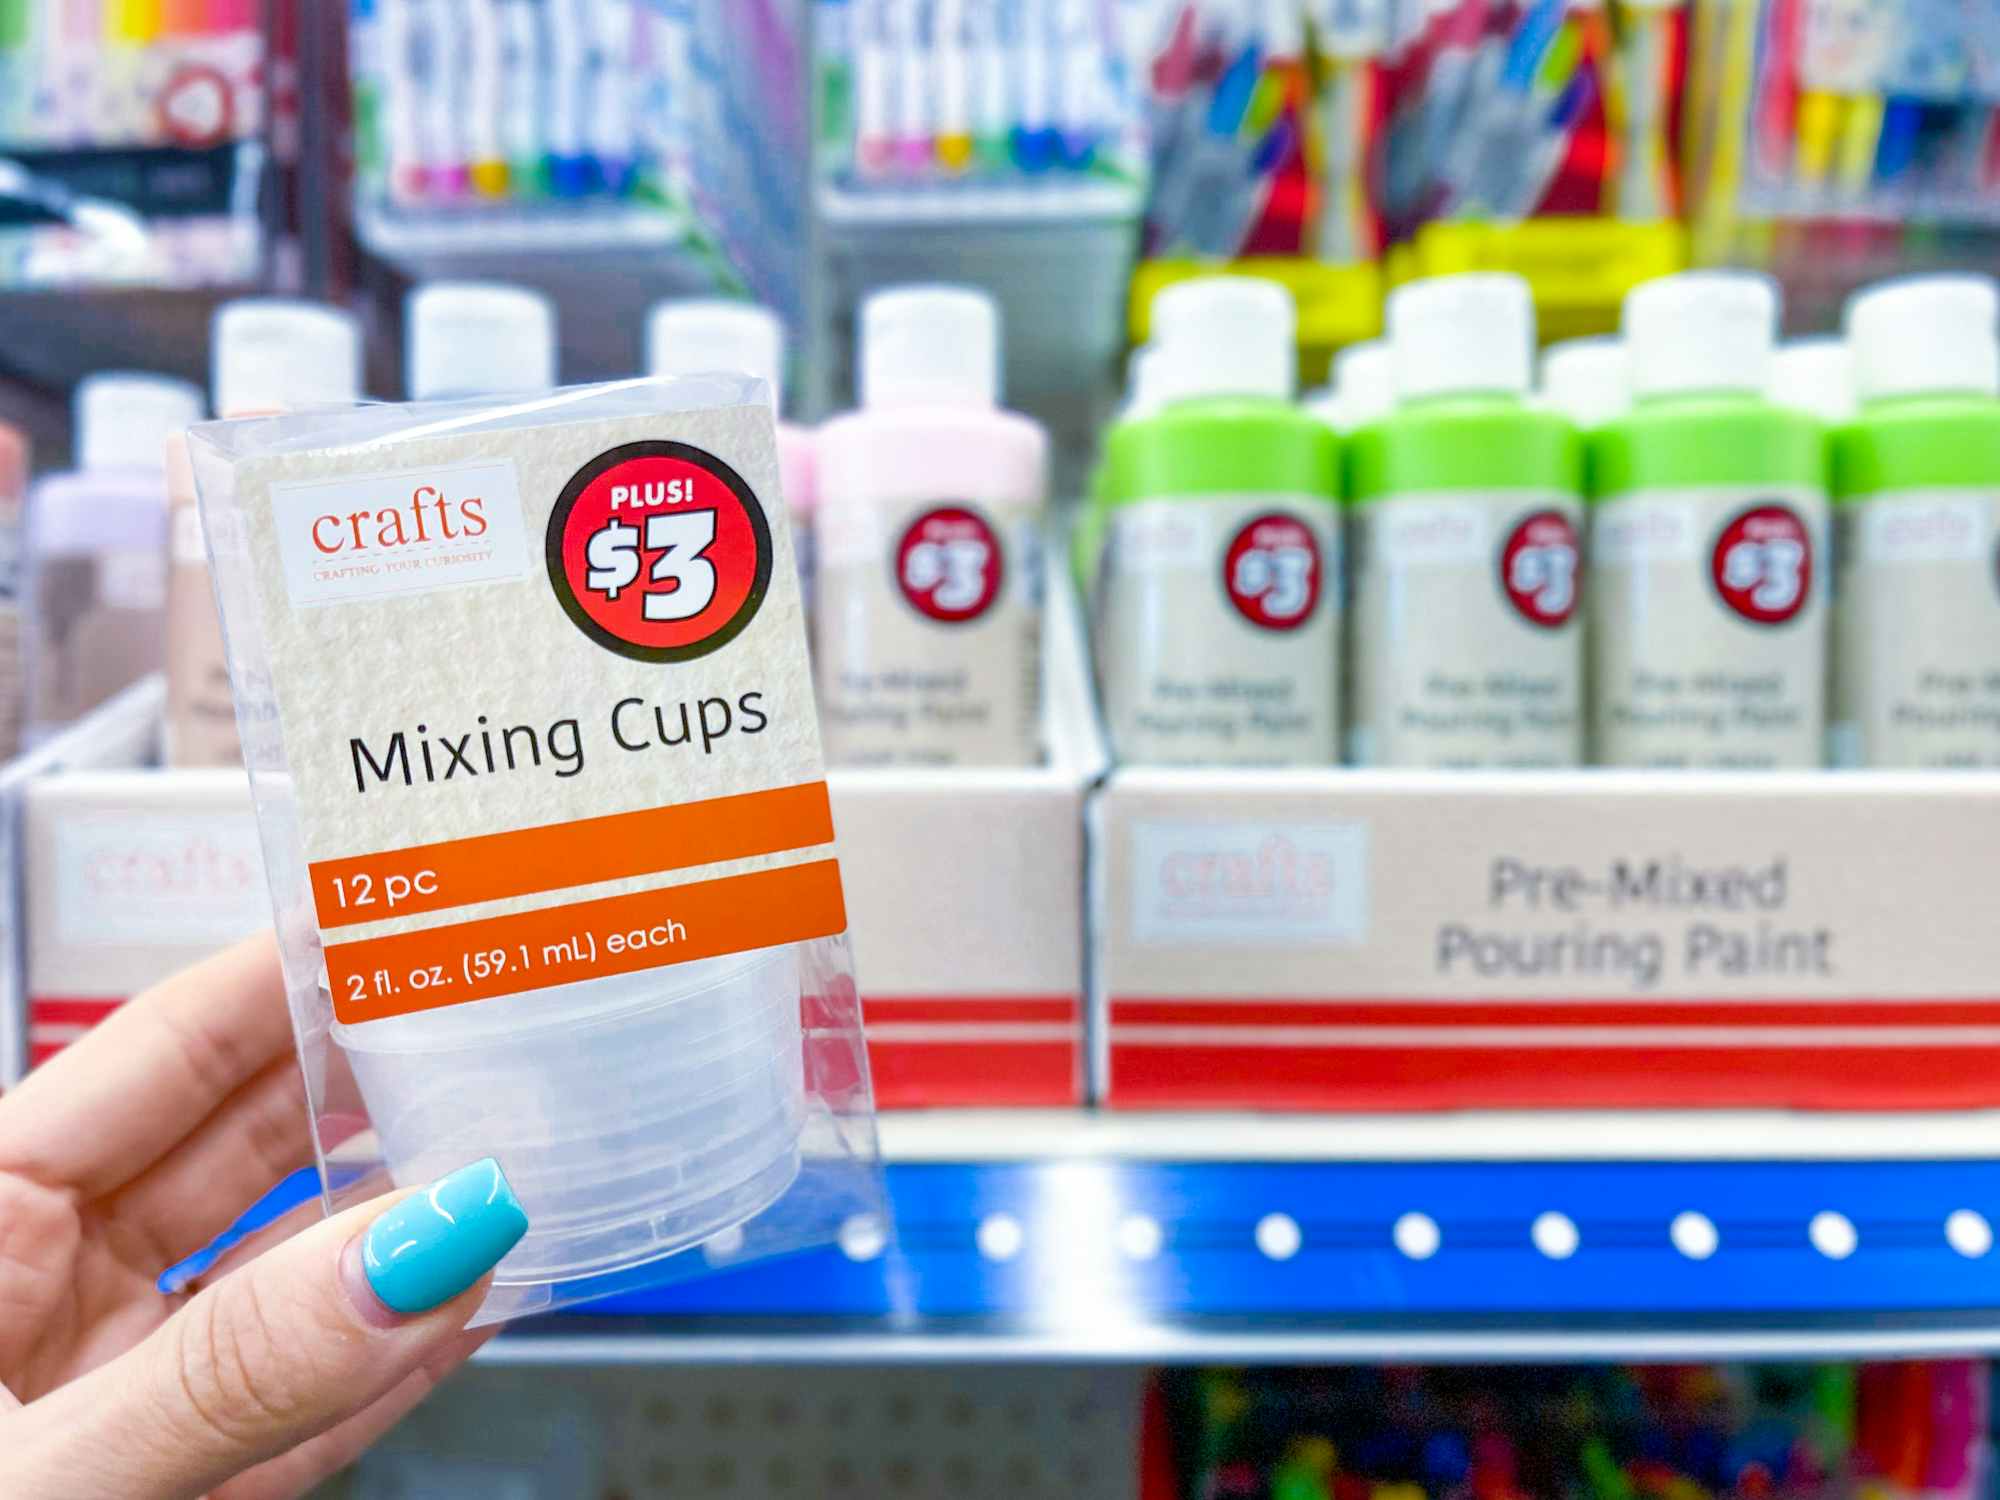 Paint mixing cups with a $3 price tag being held in front of some paint supplies on a shelf in the Dollar Tree Plus section